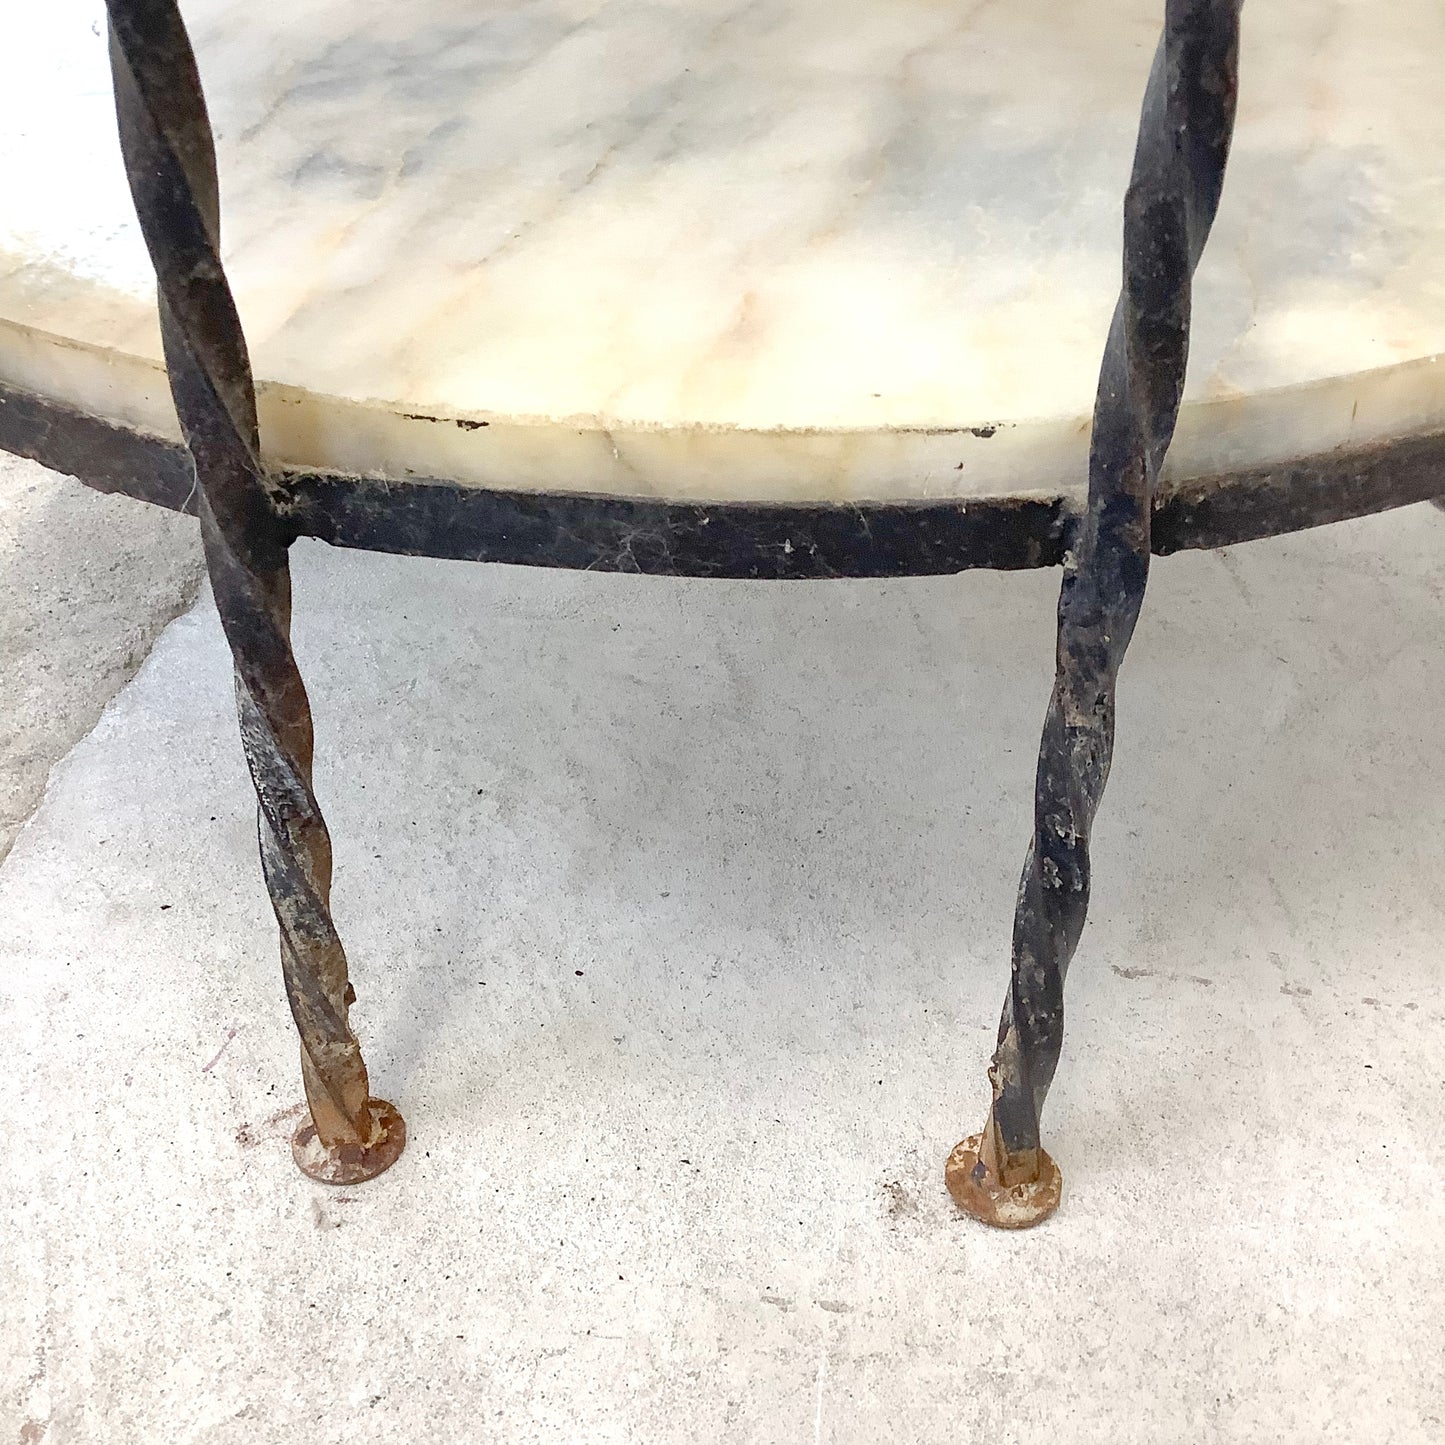 Vintage Round Etagere in Iron and Marble